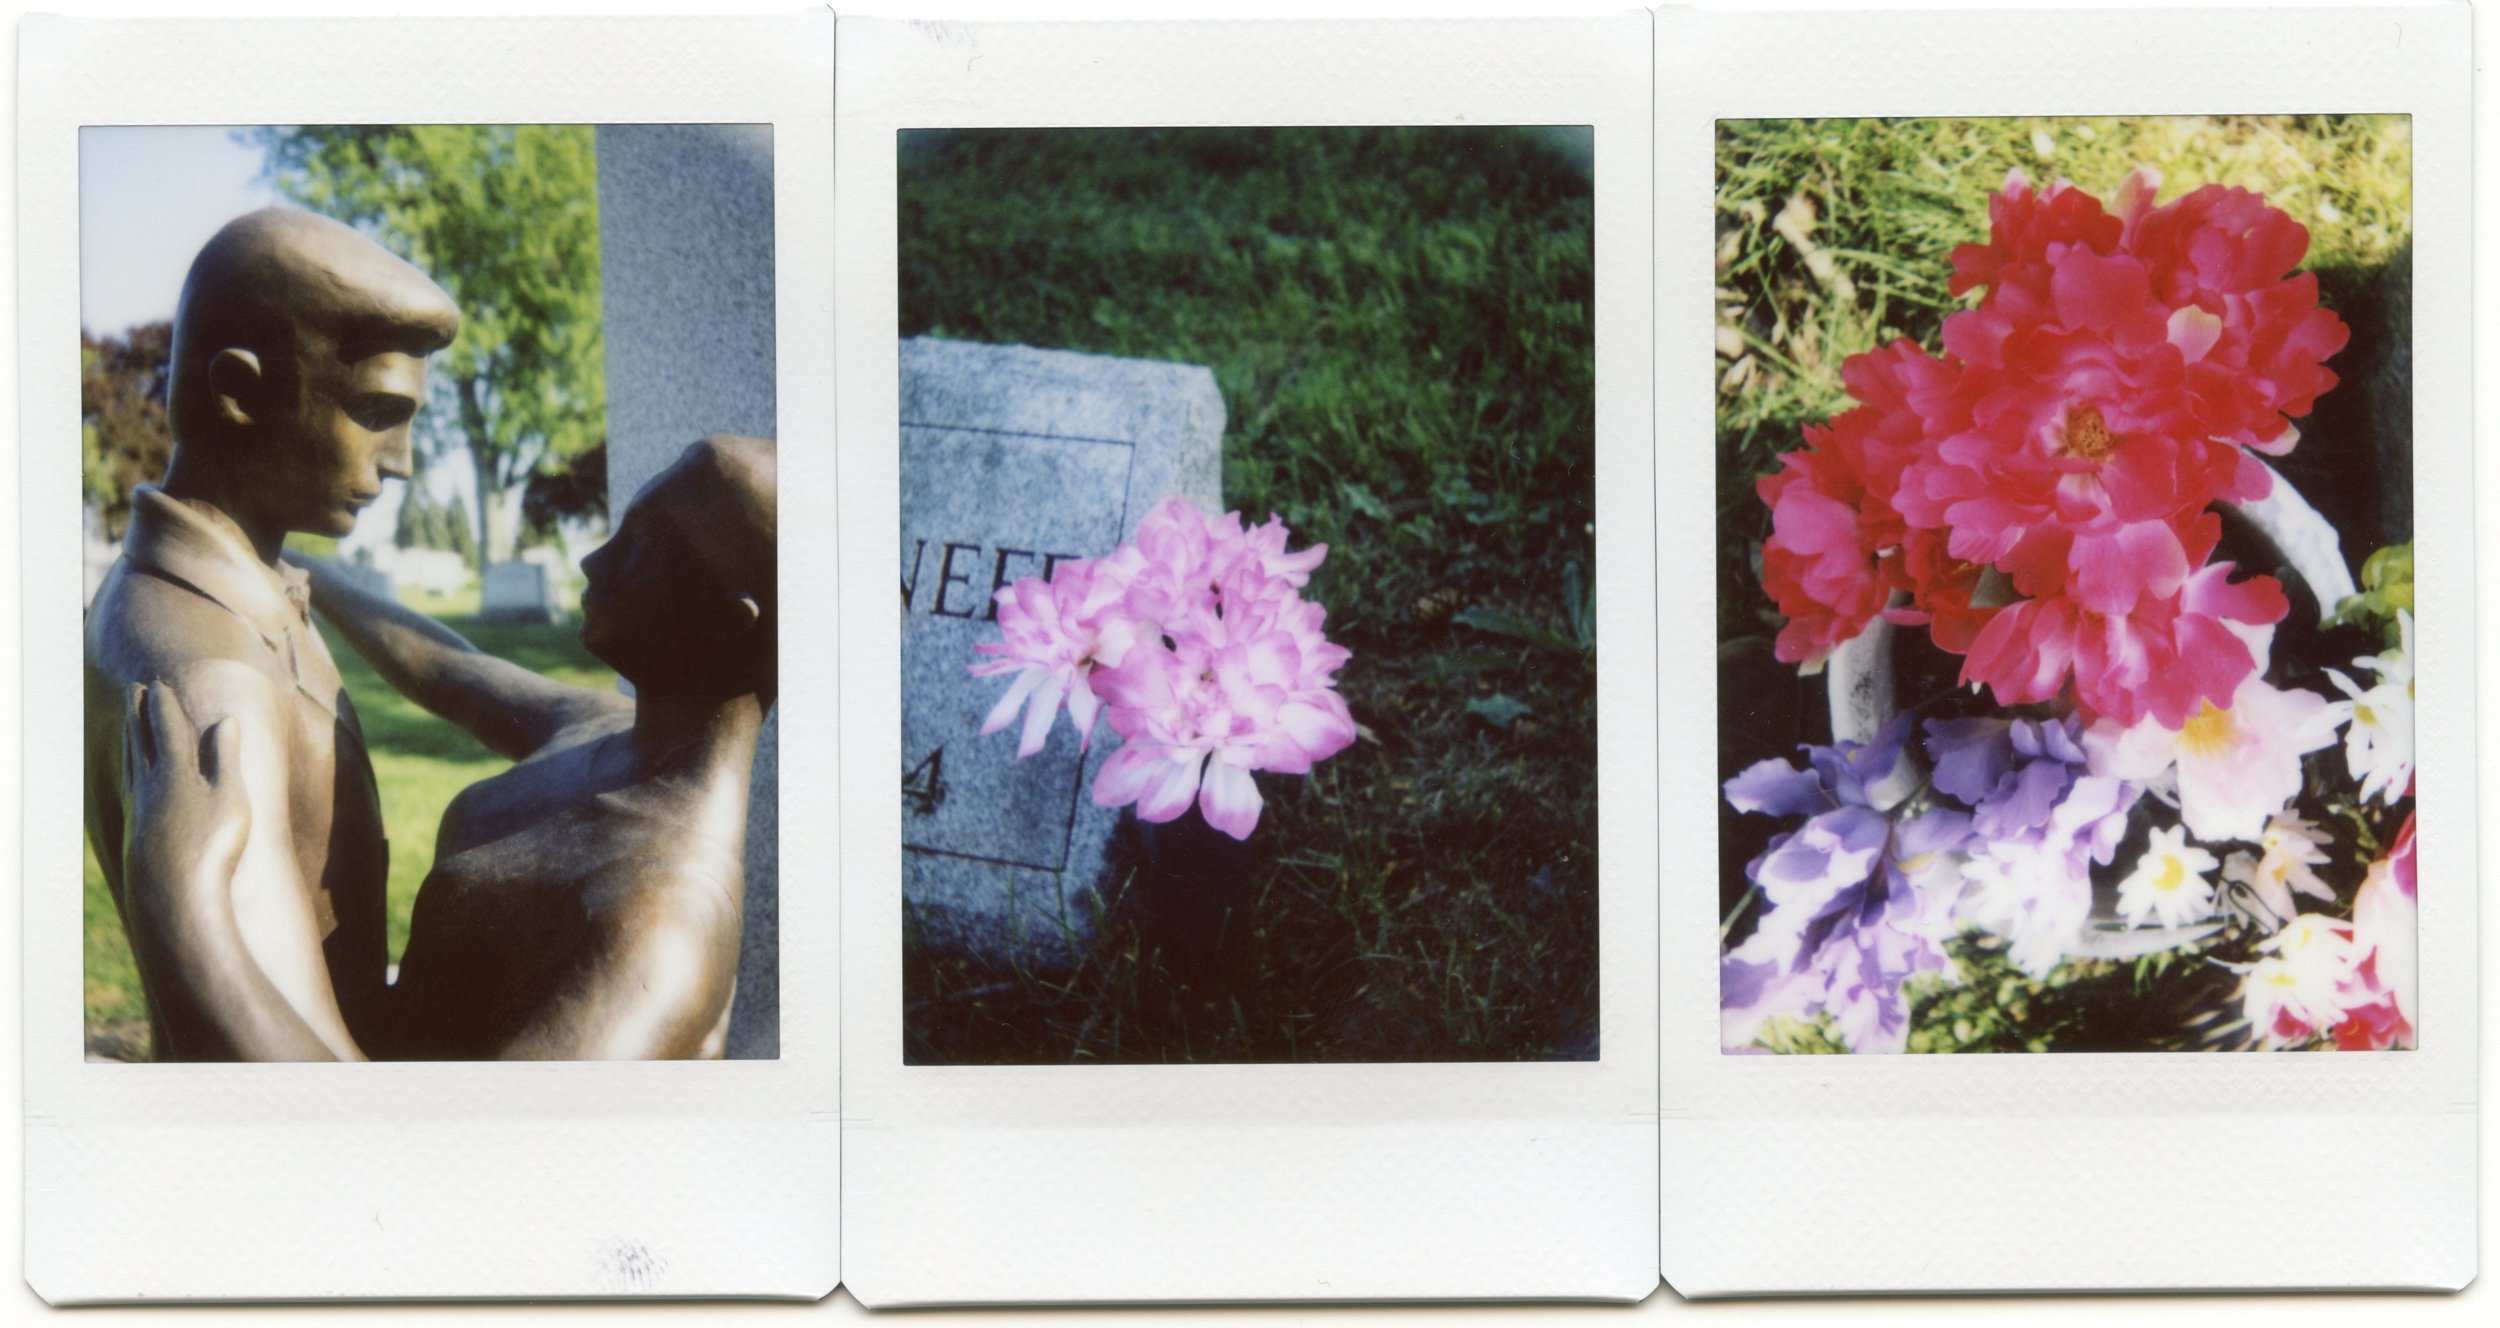 Photos taken with the Fuji Instax Mini 50S camera's macro lens from roughly 13" from the subject.